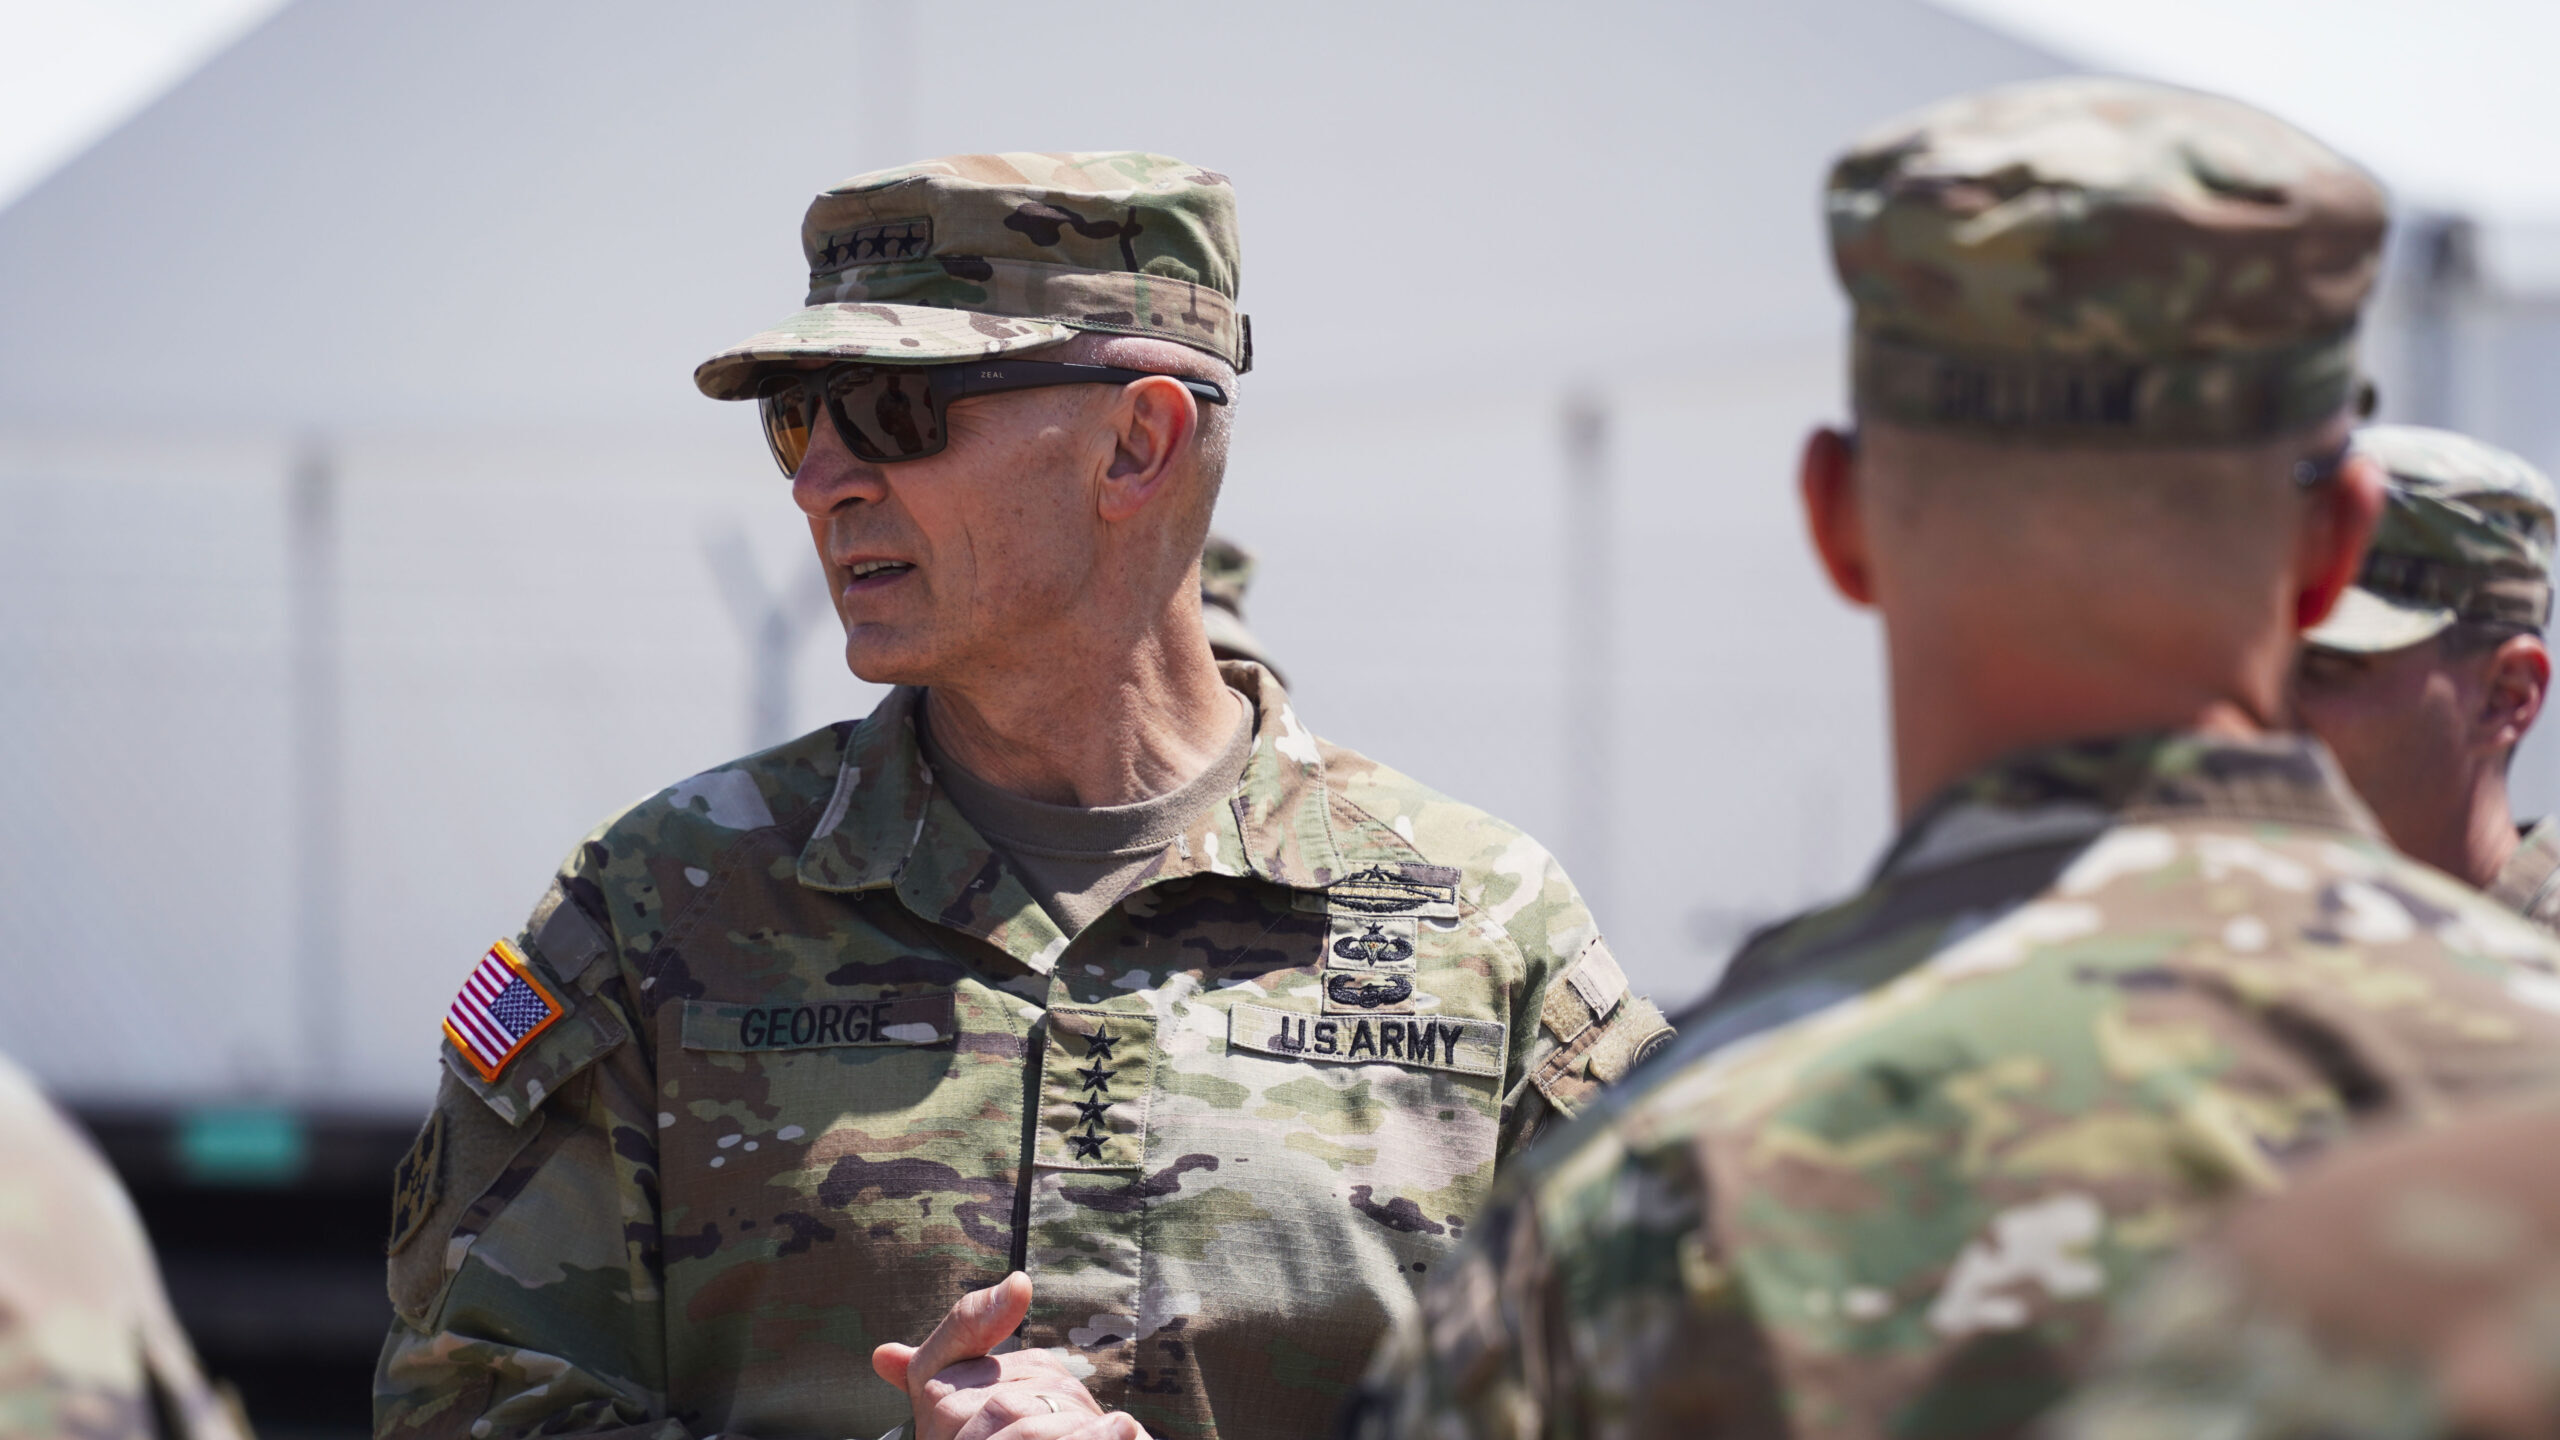 At confirmation hearing, Army’s George talks recruitment, special ops cuts and Ukraine